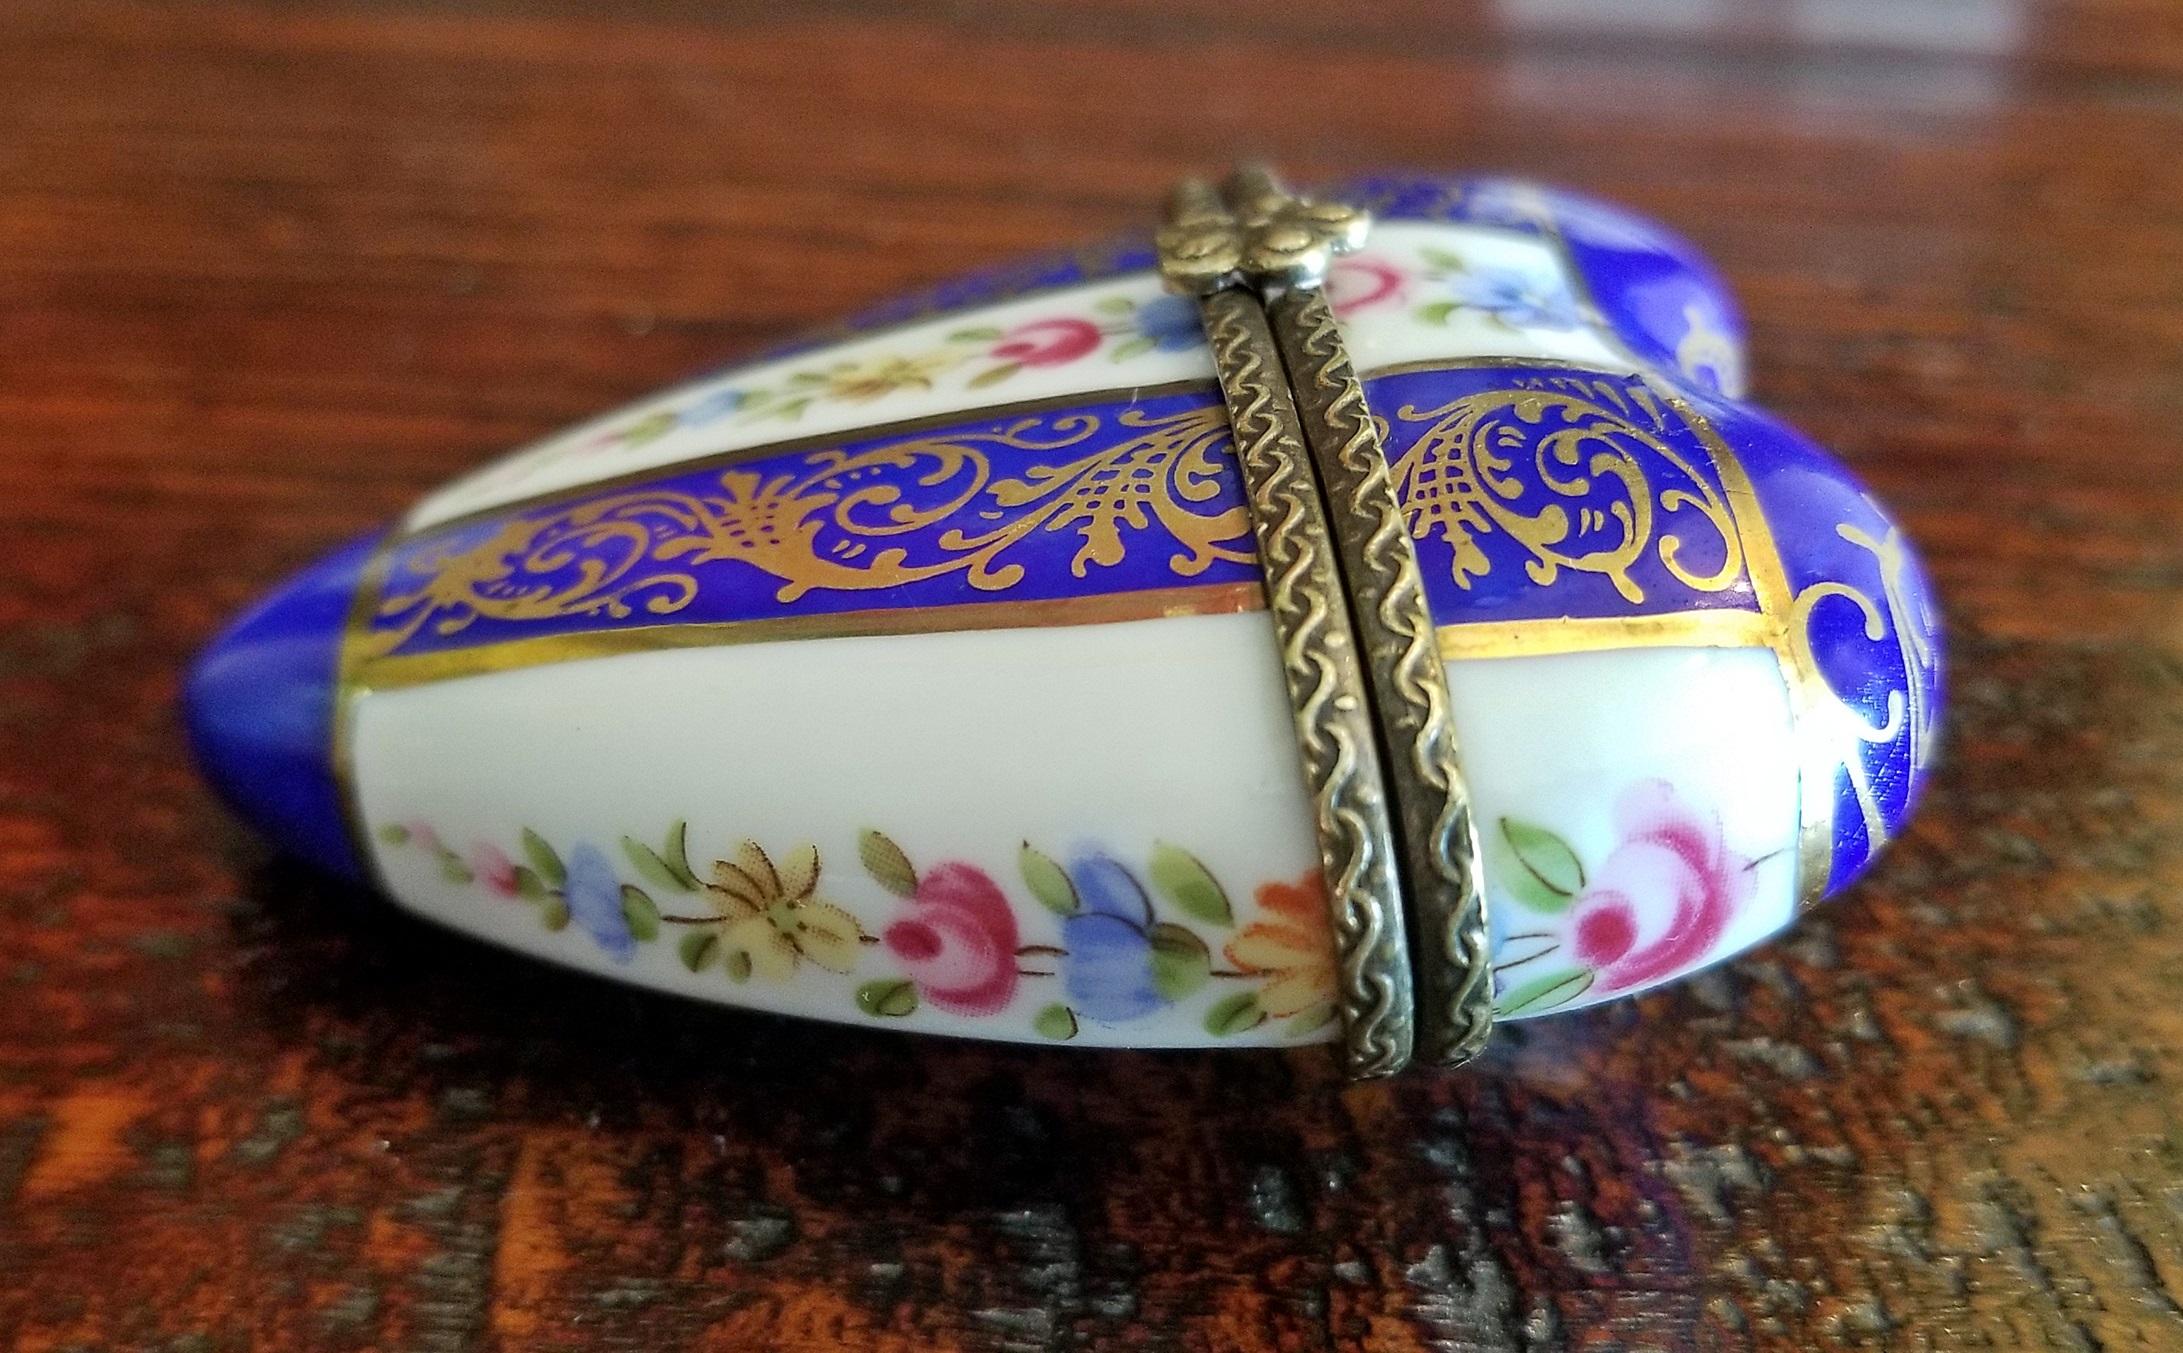 Cute French Limoges heart shaped box/bottle/container.

From, circa 1880.

Lovely gilt work with floral pattern all hand-painted.

Stunning Limoges box!
High quality!

Limoges Porcelain: Limoges porcelain designates hard-paste porcelain